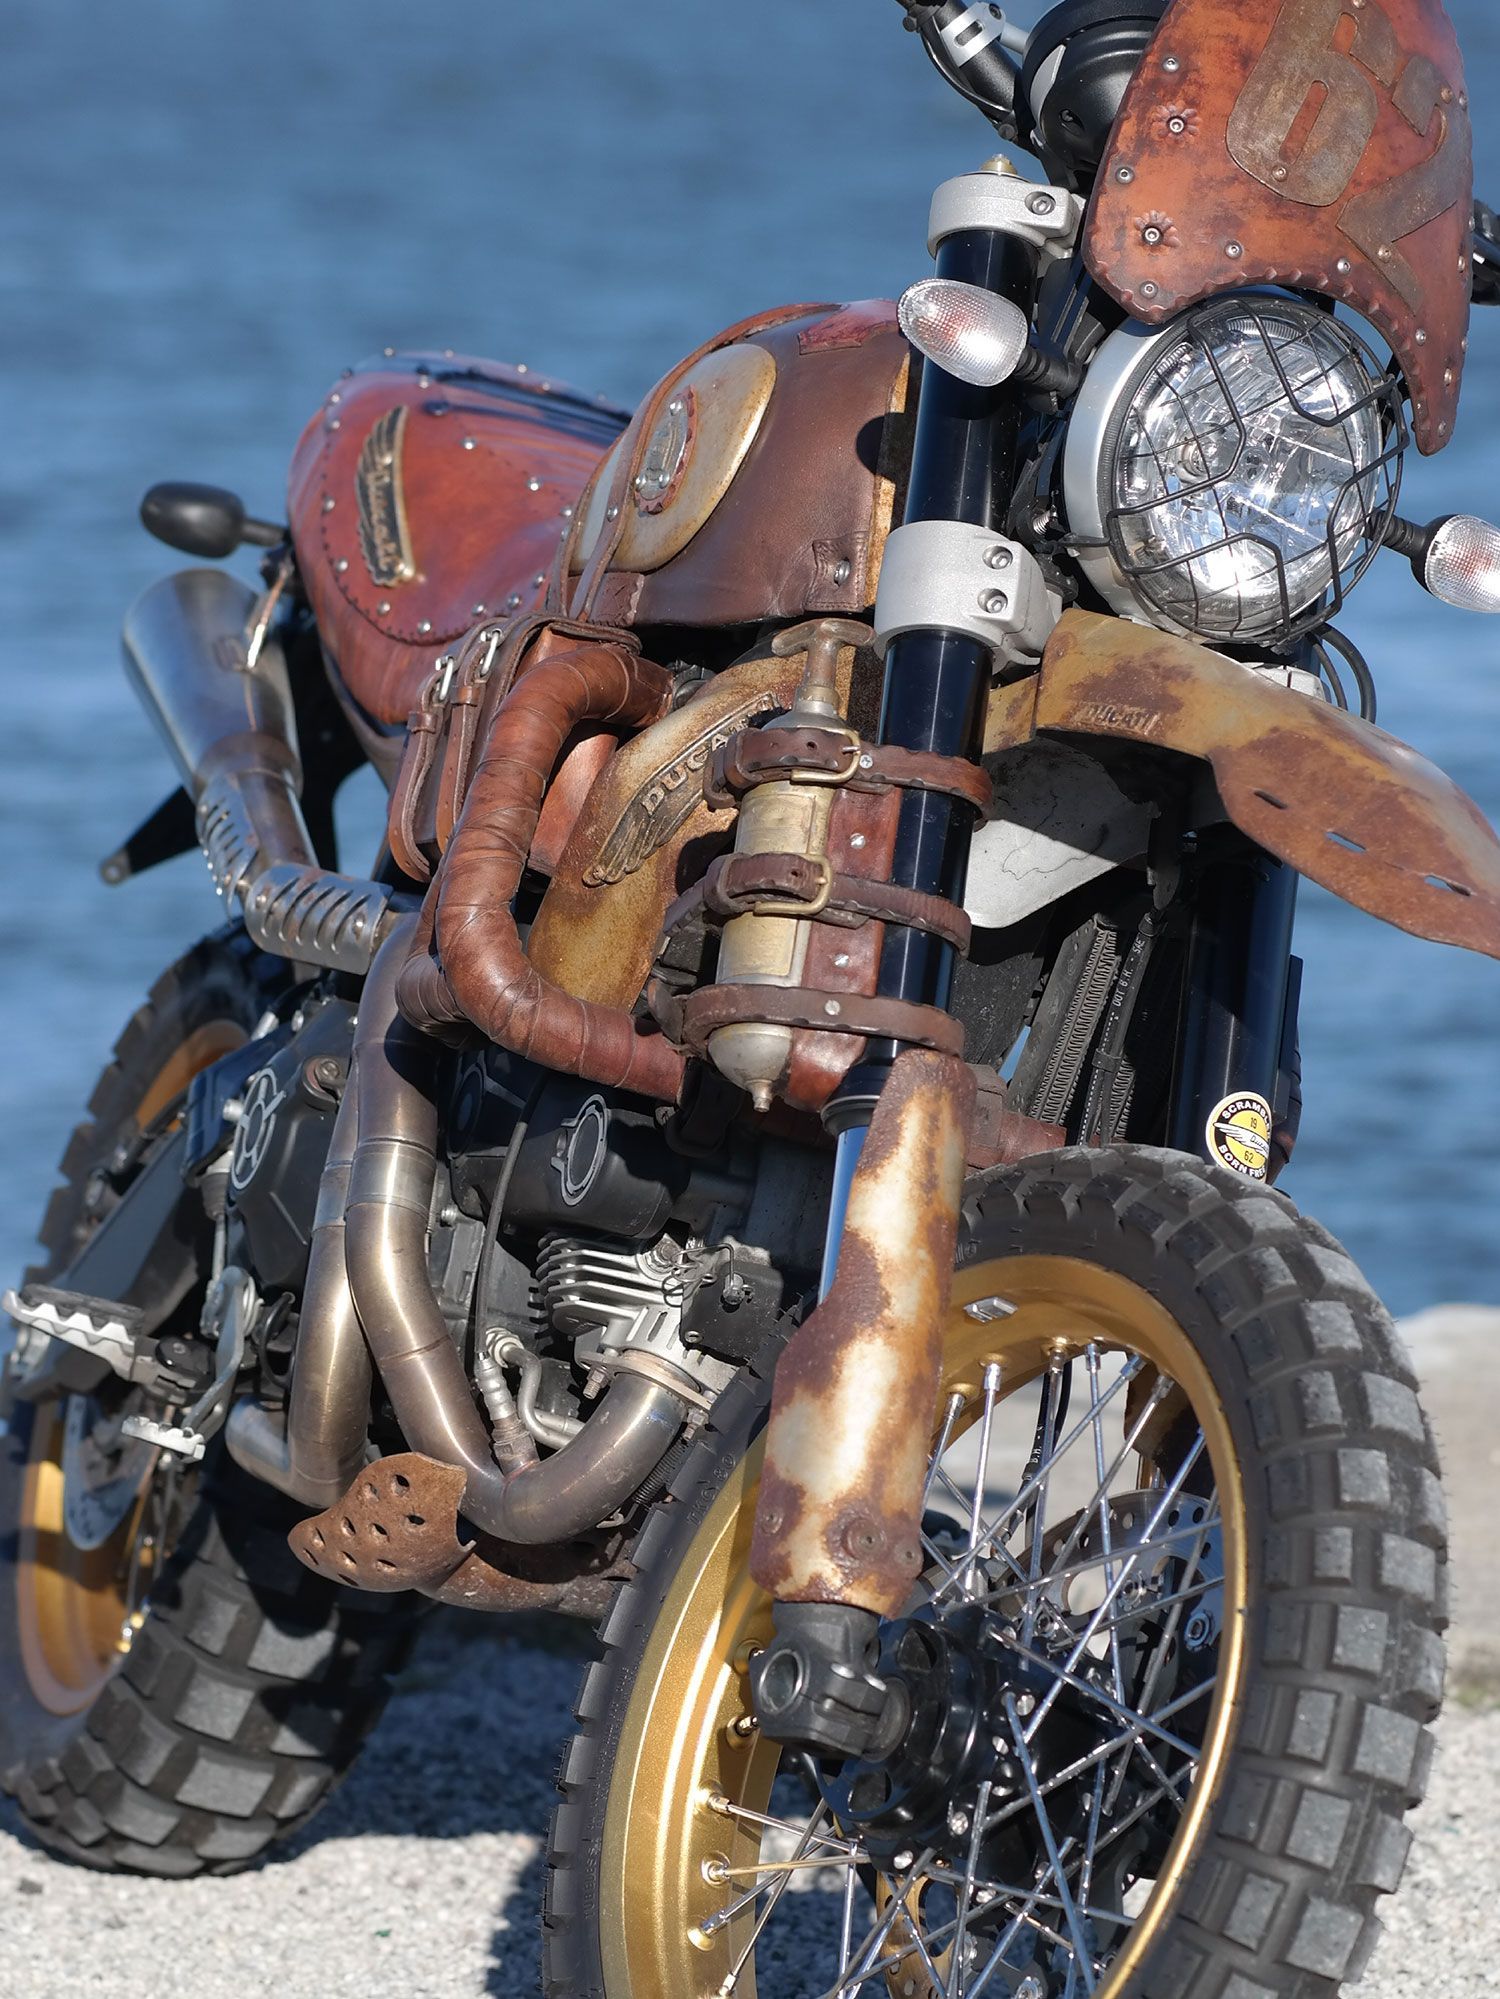 Texas Rider includes the rust, for Best Ducati Official Dealer from Austria